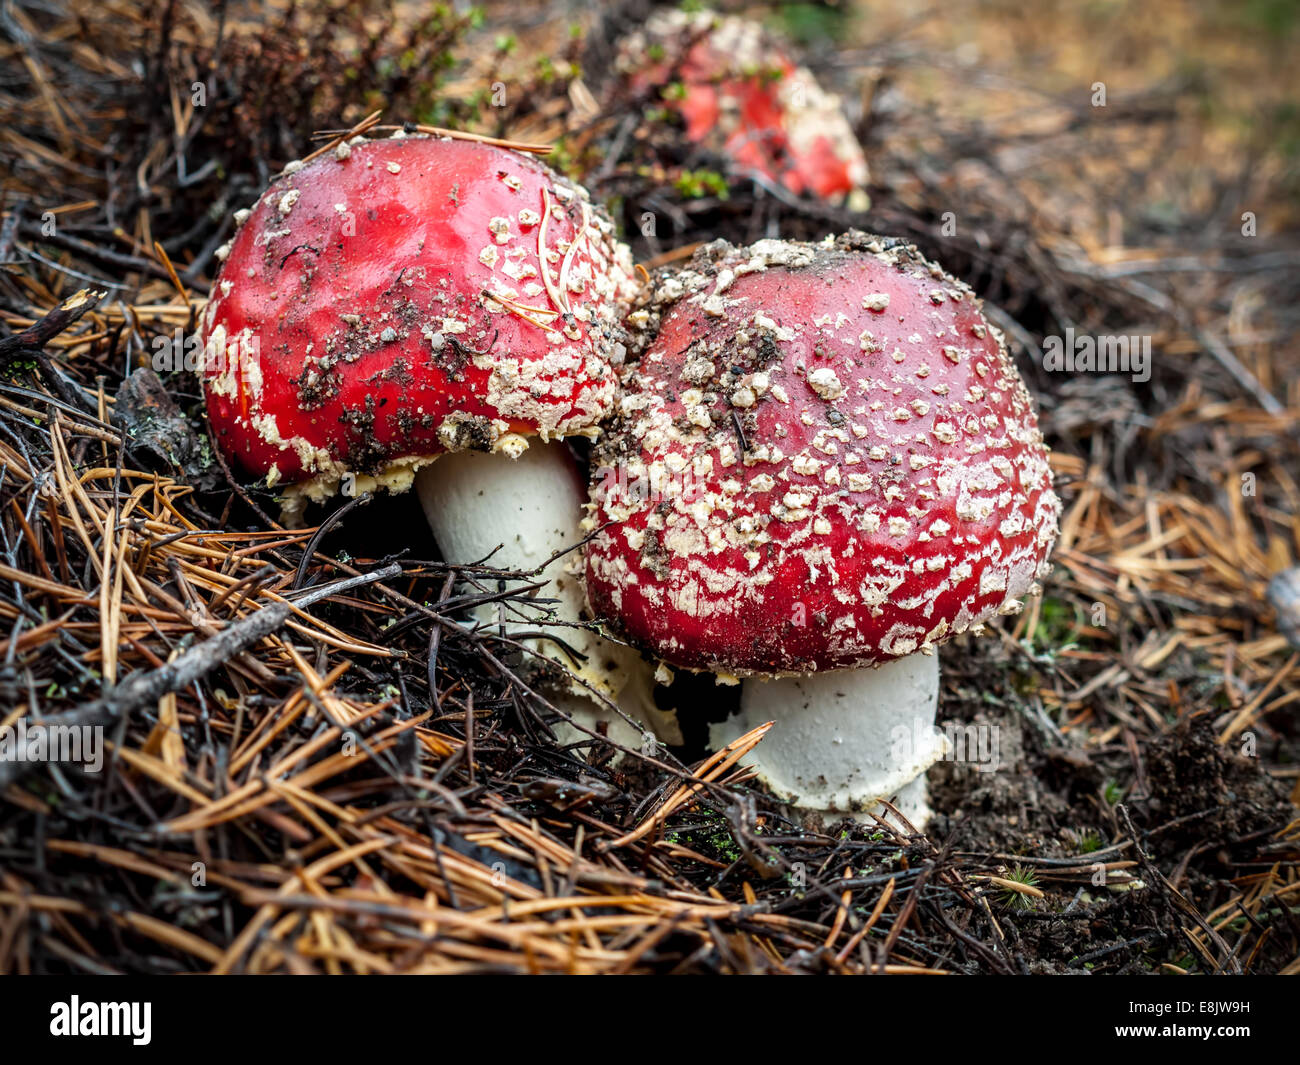 Group of fly agaric mushrooms growing among conifer needles Stock Photo